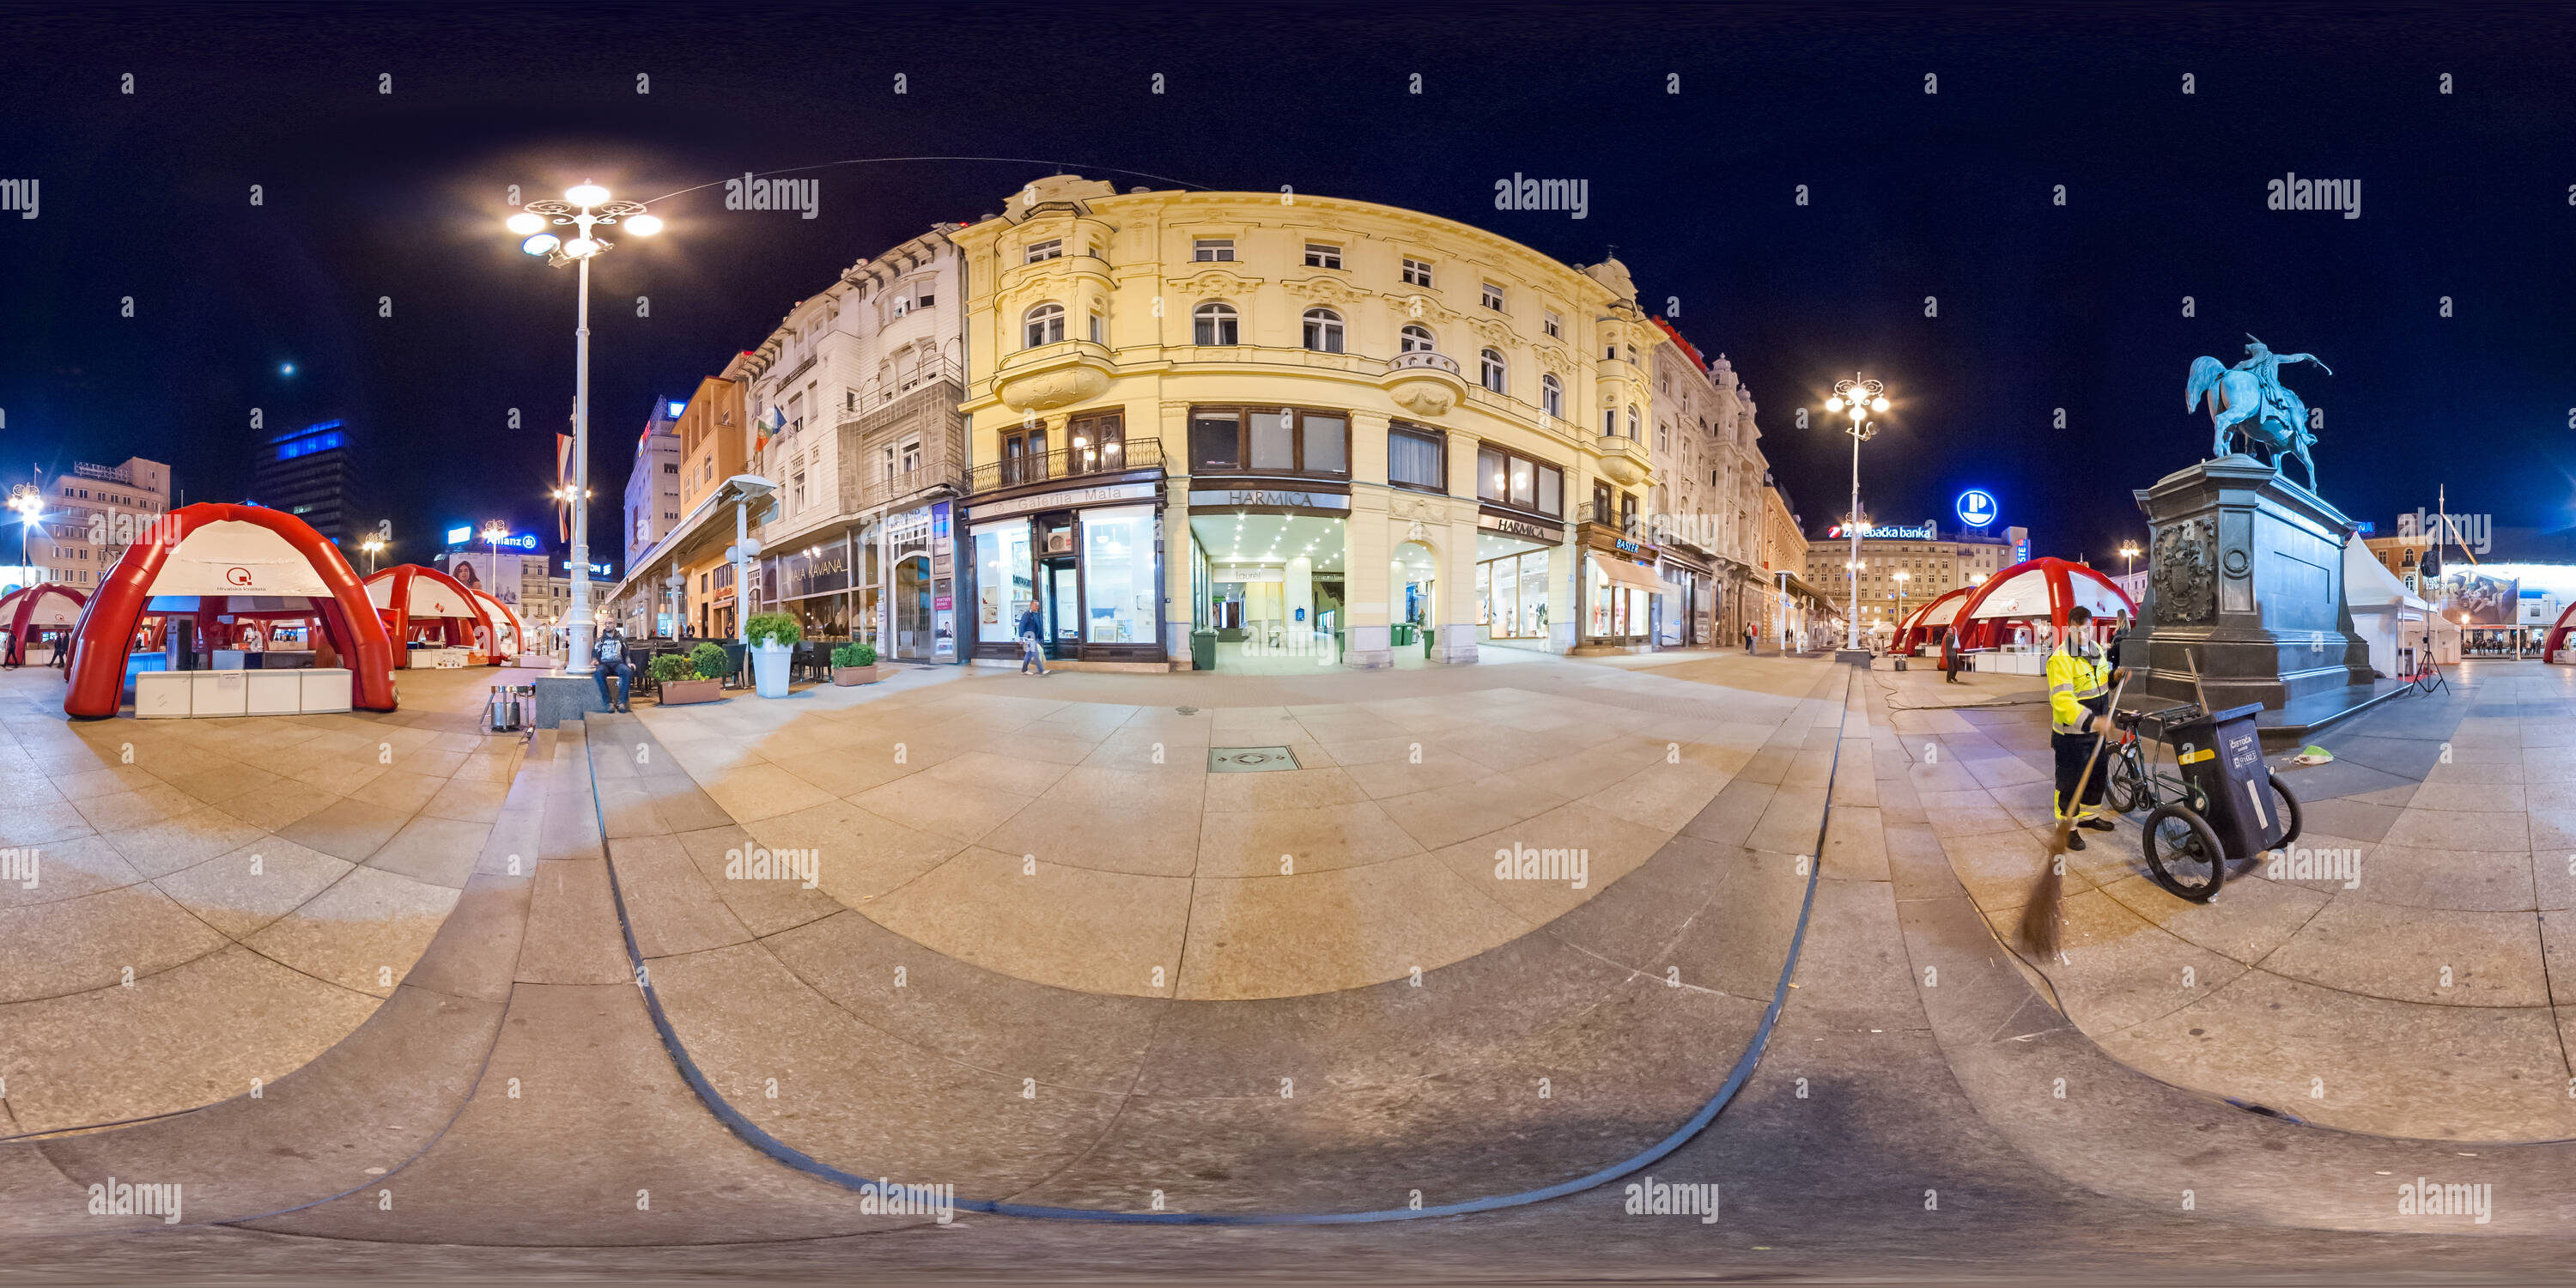 360 degree panoramic view of Jelacic sguare in Zagreb, Croatia